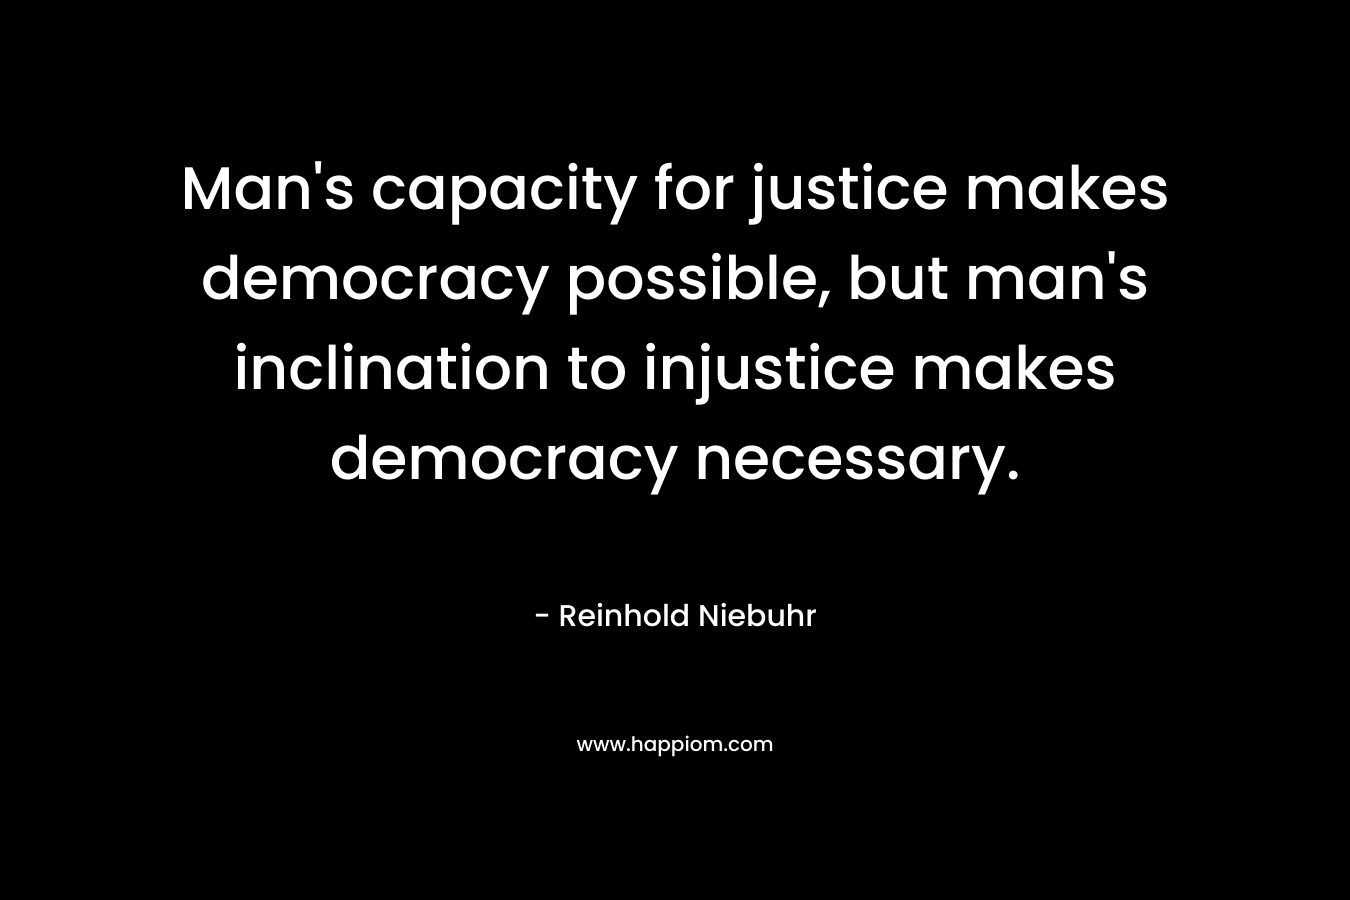 Man’s capacity for justice makes democracy possible, but man’s inclination to injustice makes democracy necessary. – Reinhold Niebuhr